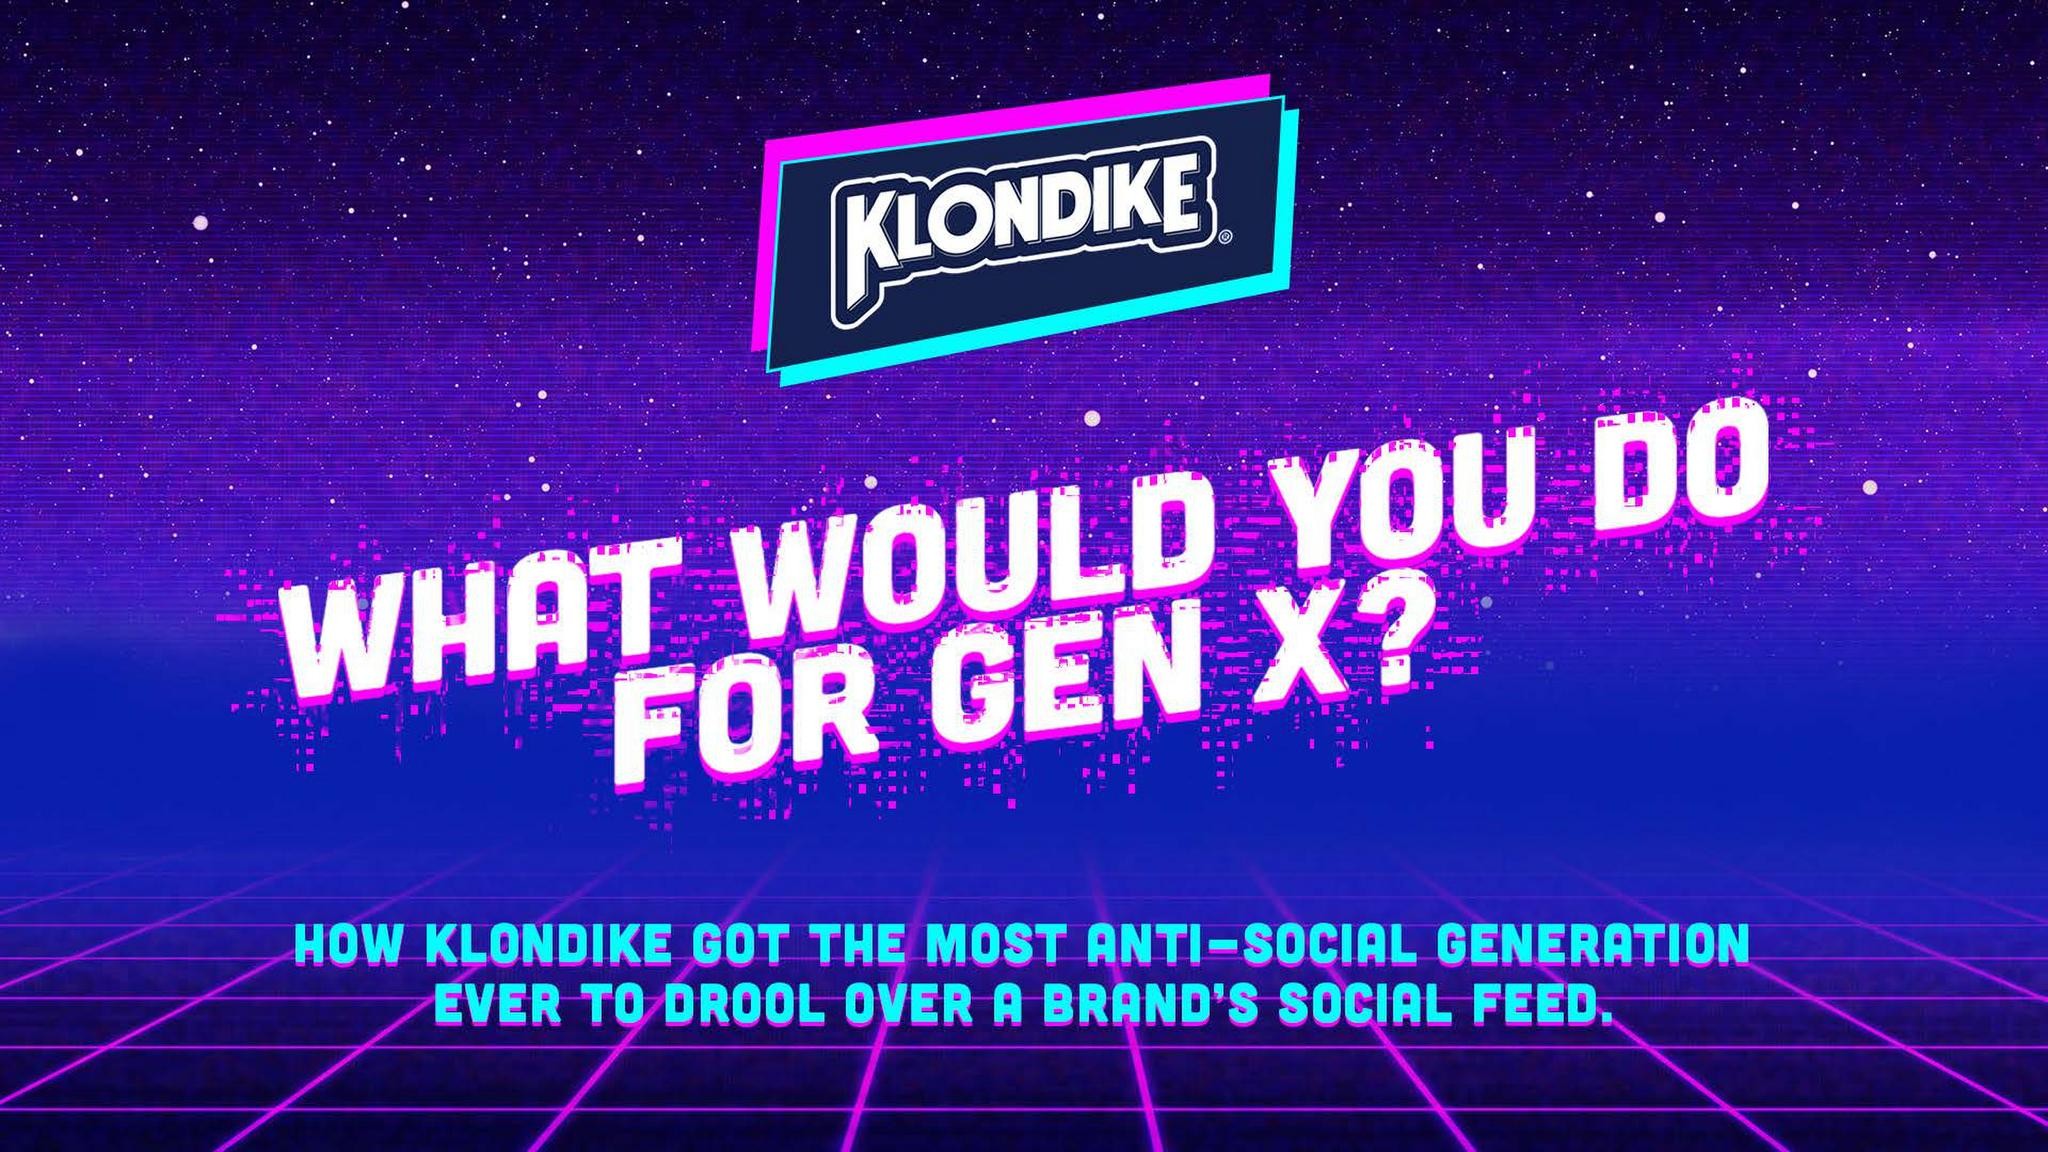 What Would You Do for Gen X